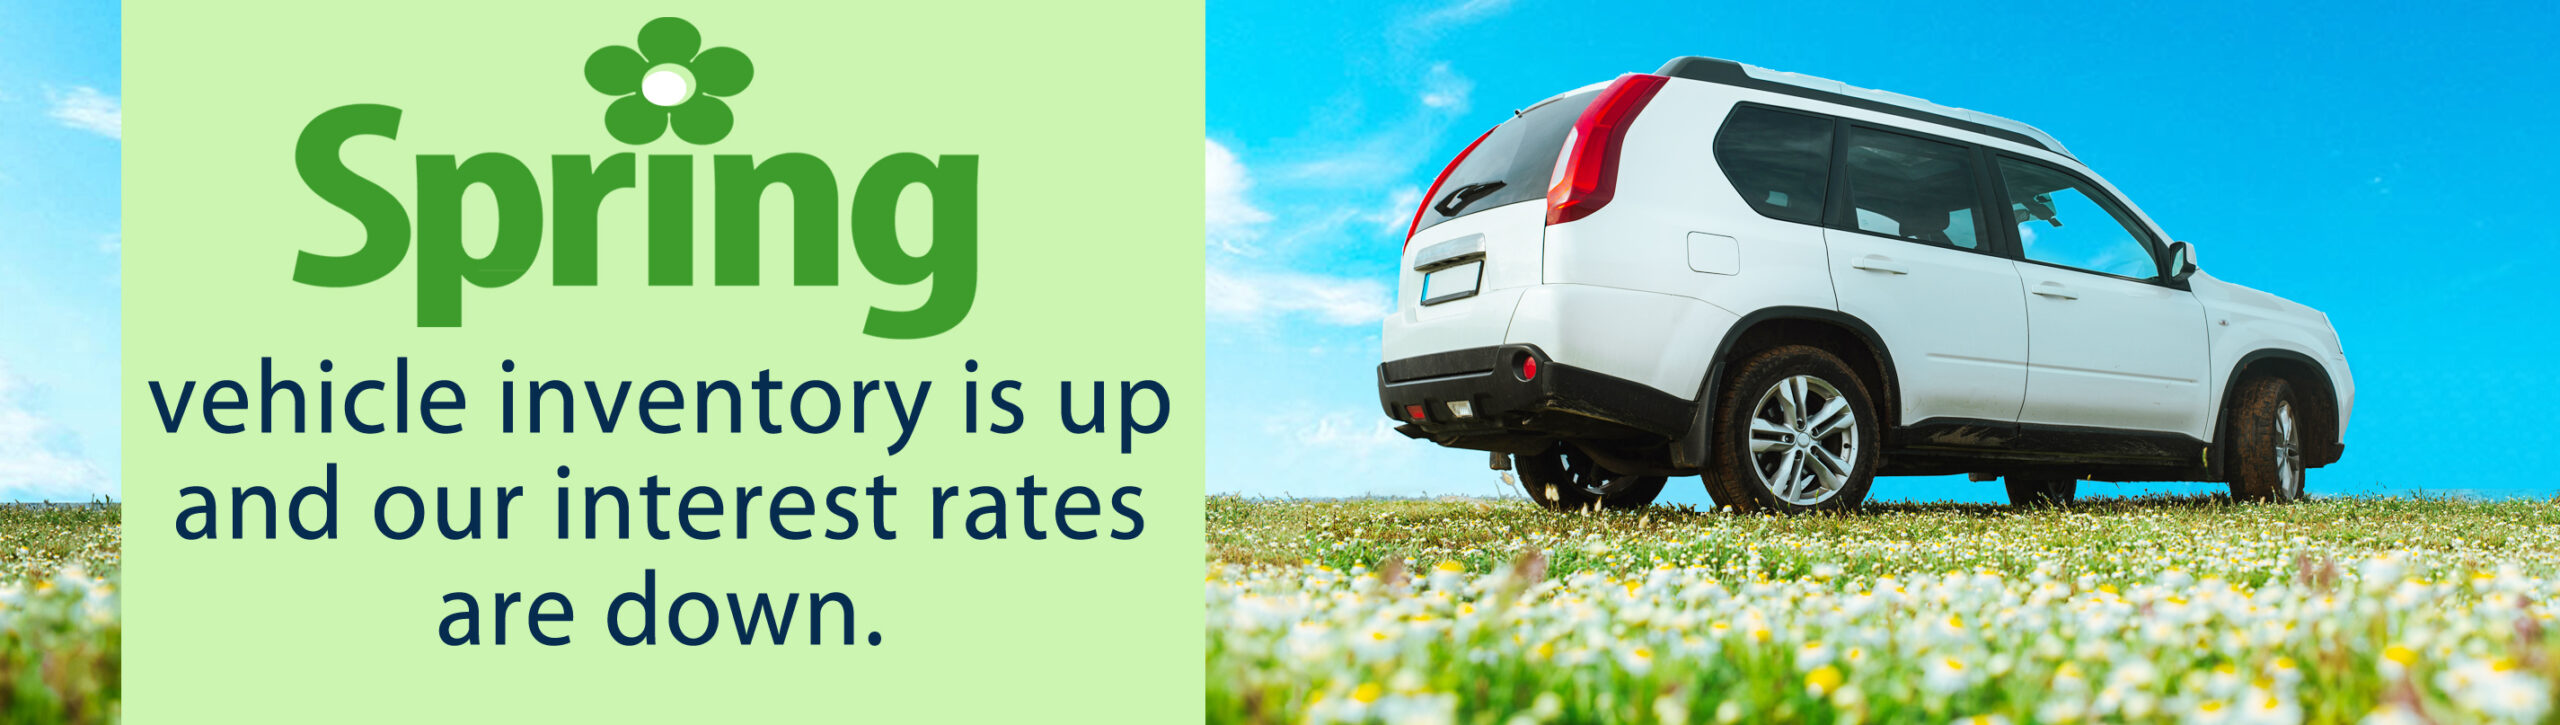 Spring vehicle inventory is up and our interest rates are down.